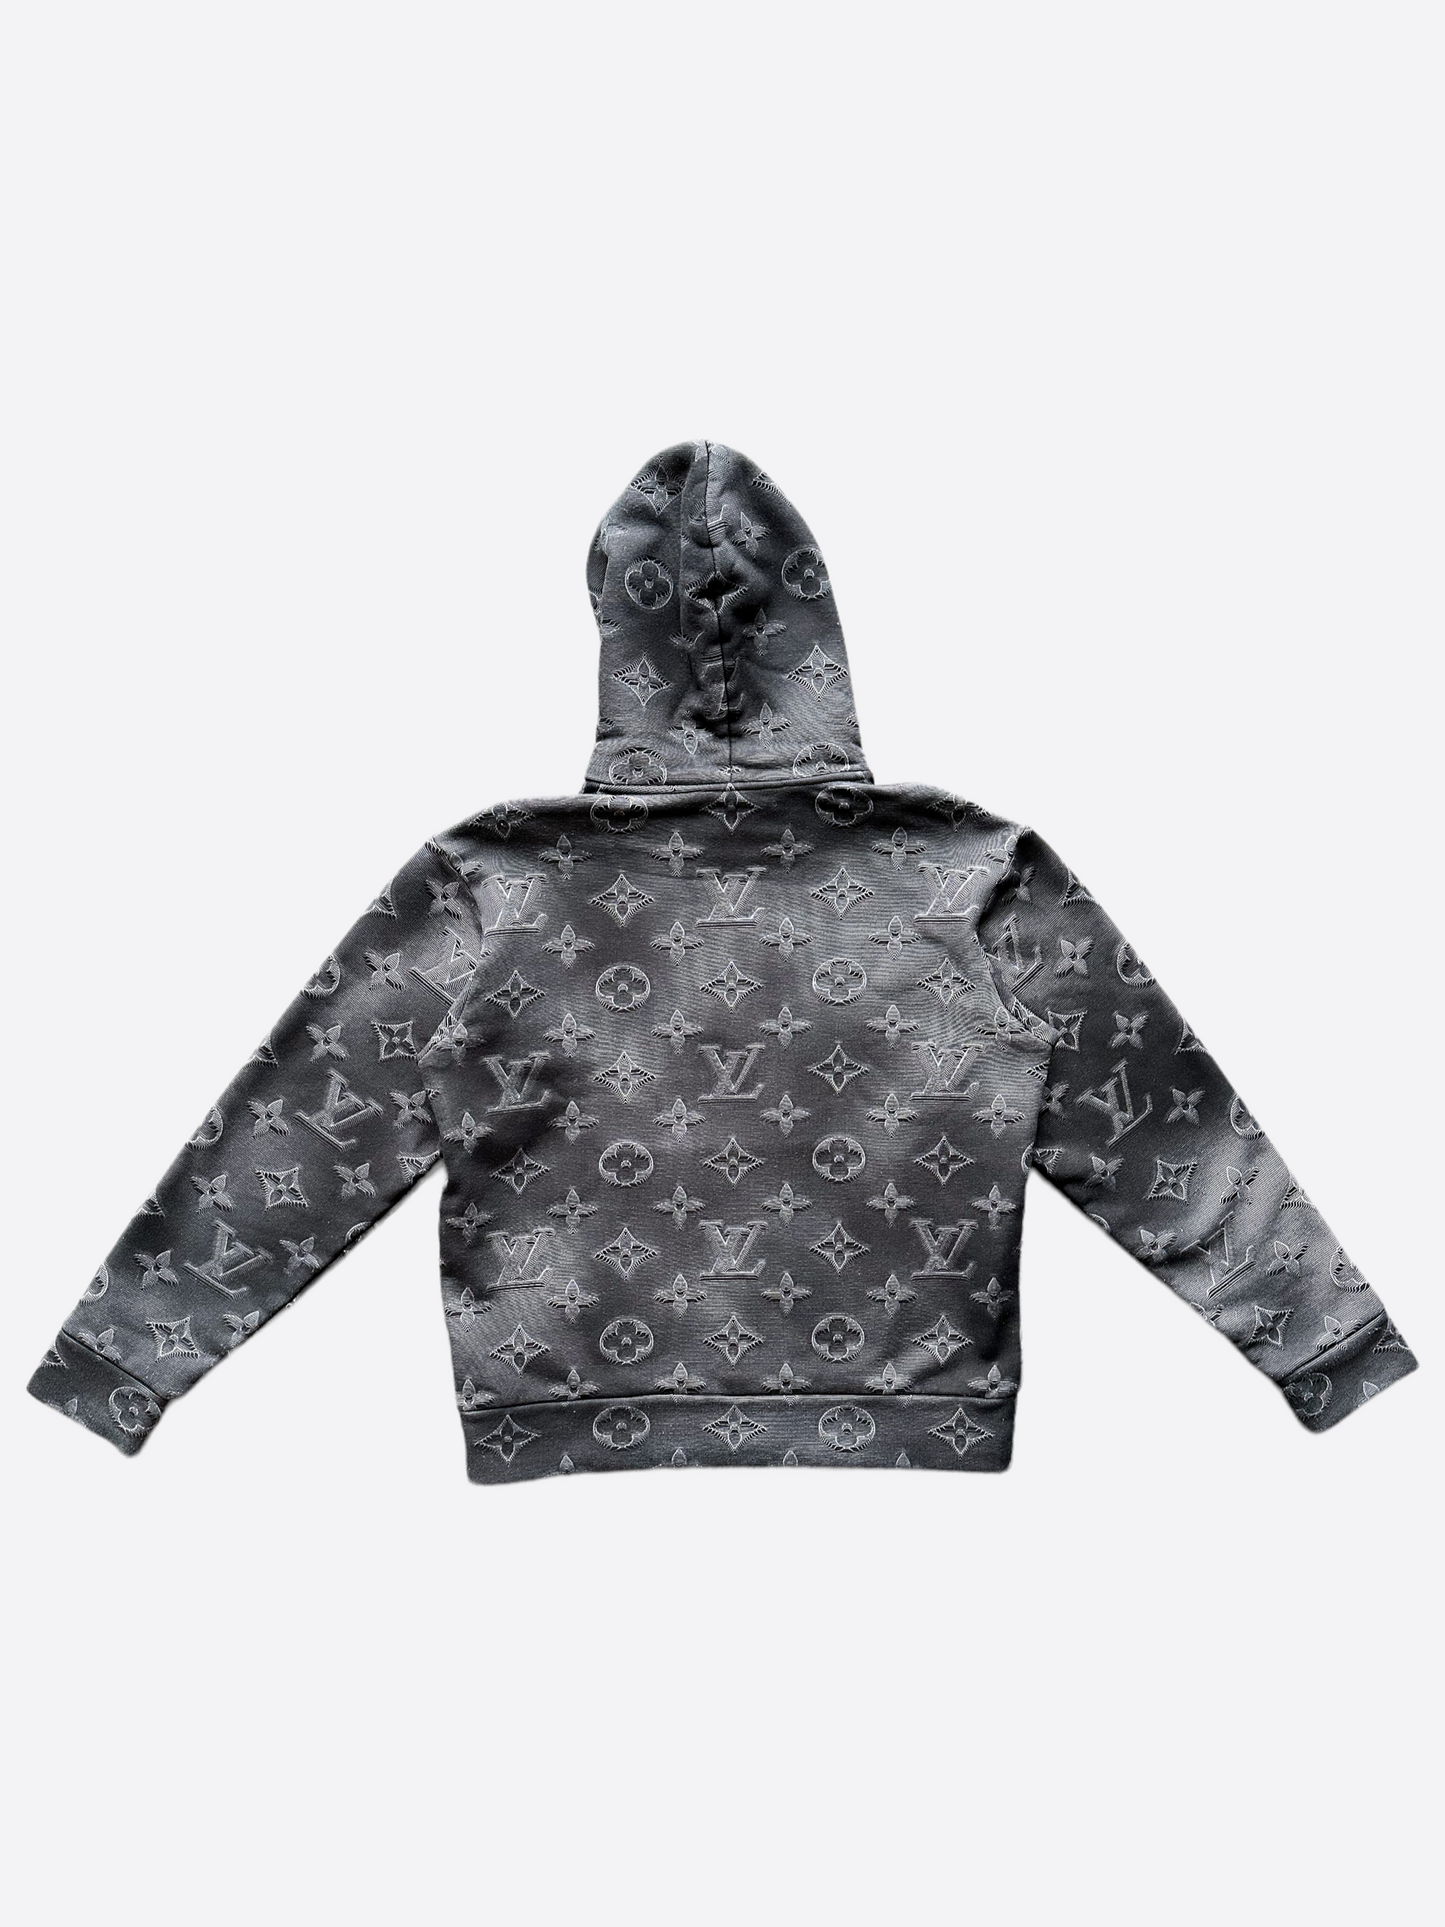 LV 2054 Hoodie, Men's Fashion, Coats, Jackets and Outerwear on